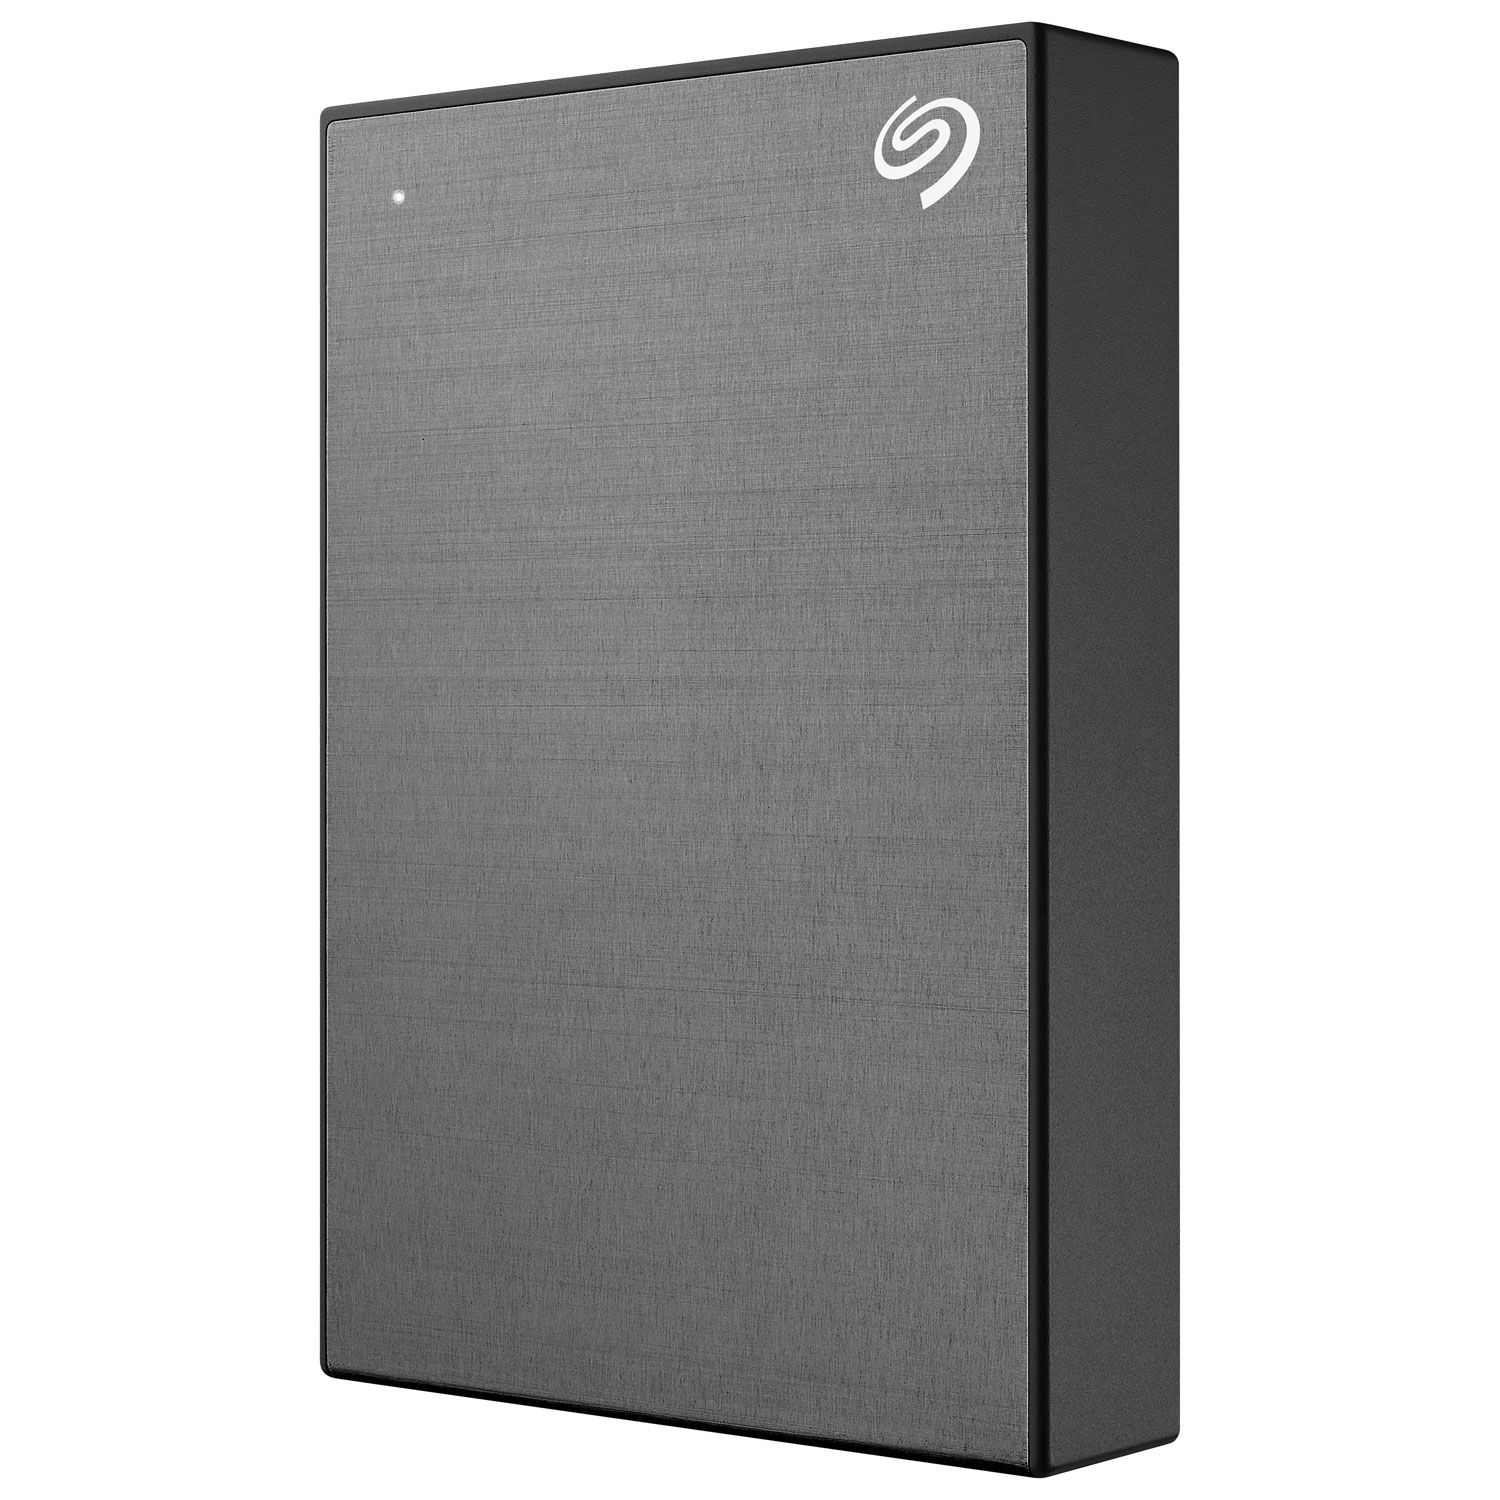 Seagate One Touch 4TB USB 3.0 Portable External Hard Drive (STKC4000404) - Grey - Only at Best Buy